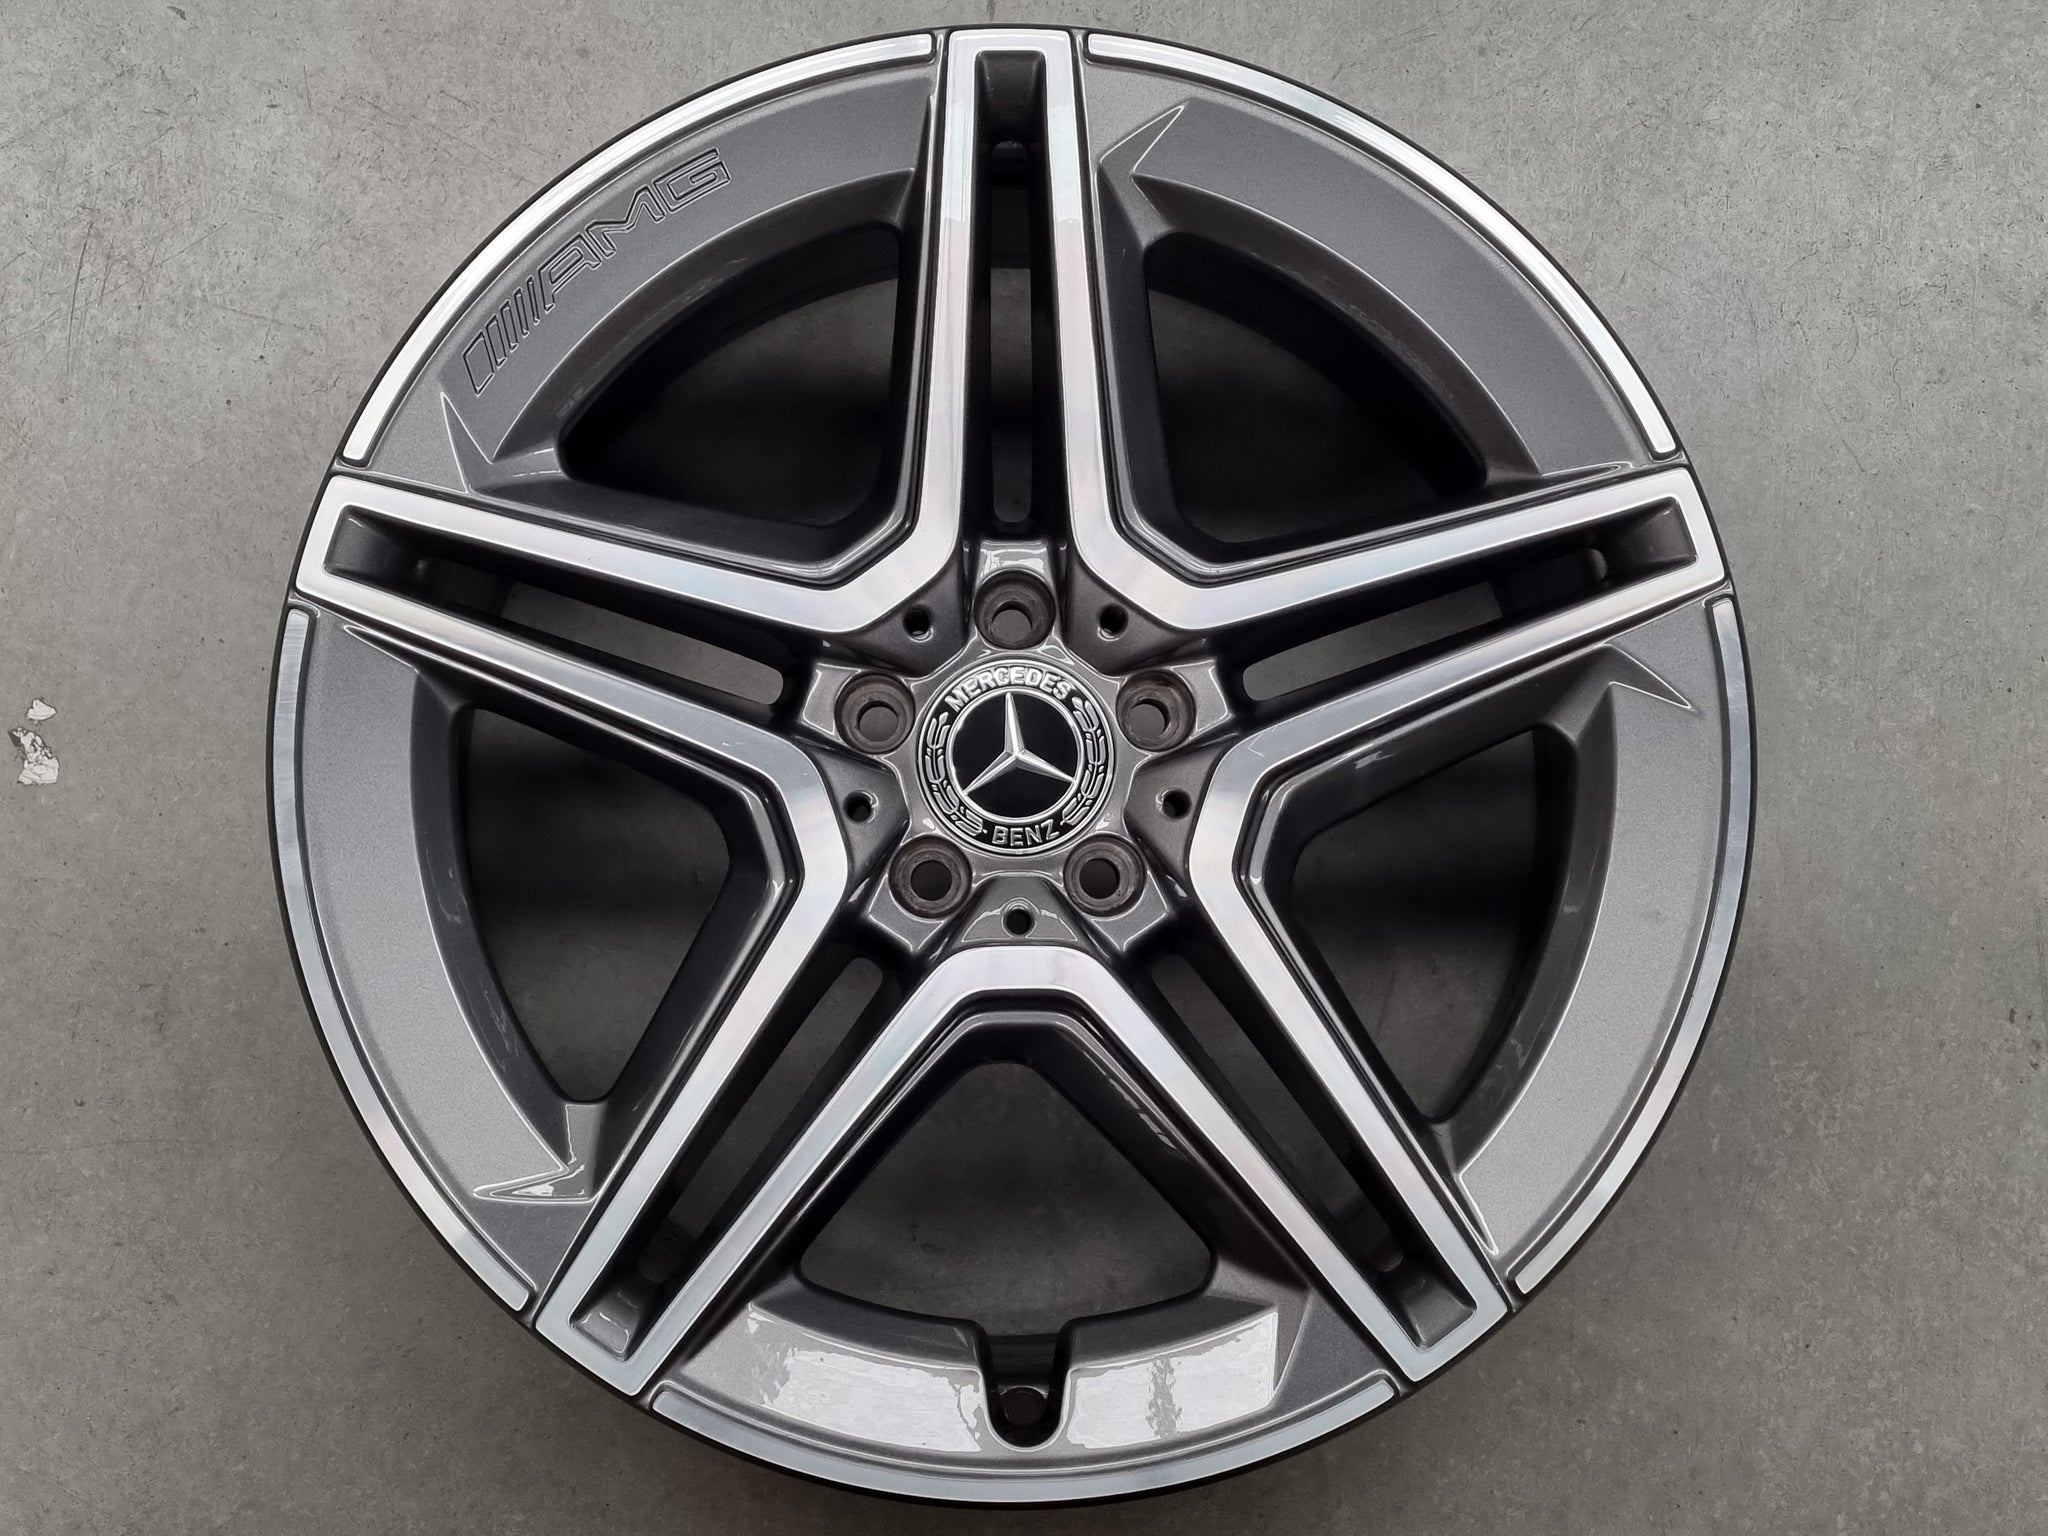 Load image into Gallery viewer, Genuine Mercedes GLE 2021 Model AMG 20 Inch Wheel Spare Front
